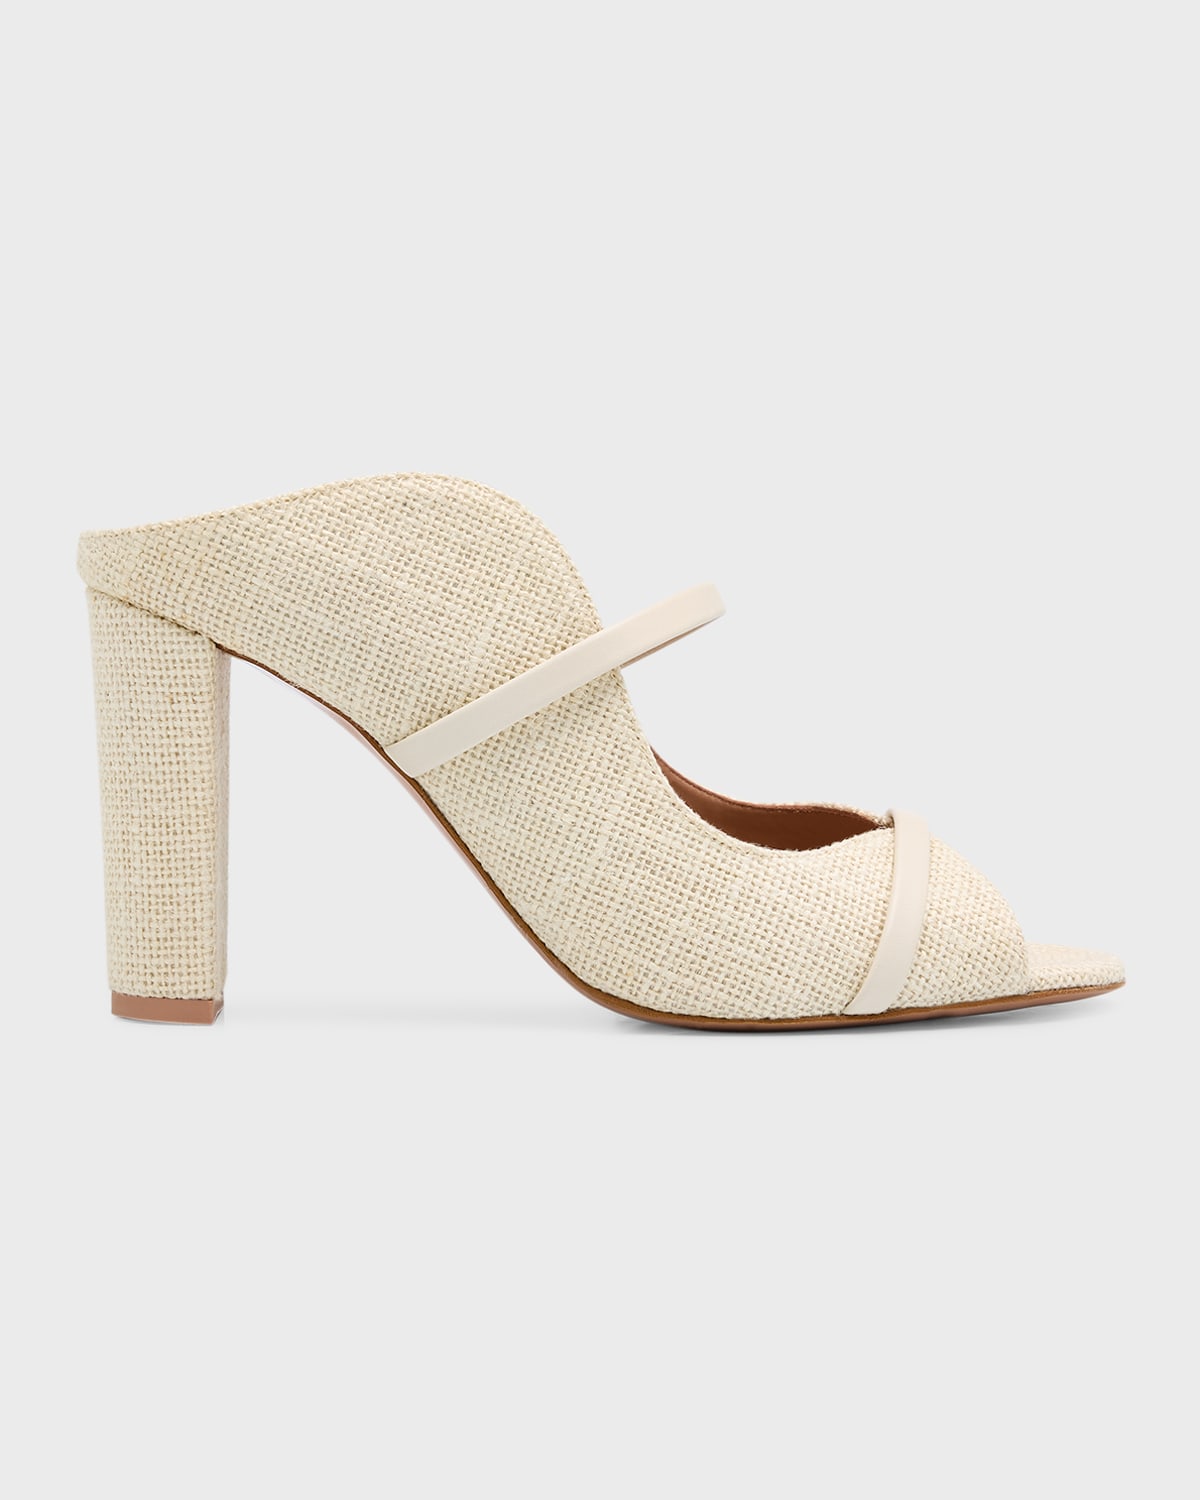 Malone Souliers Norah Raffia Two-band Slide Sandals In Cream